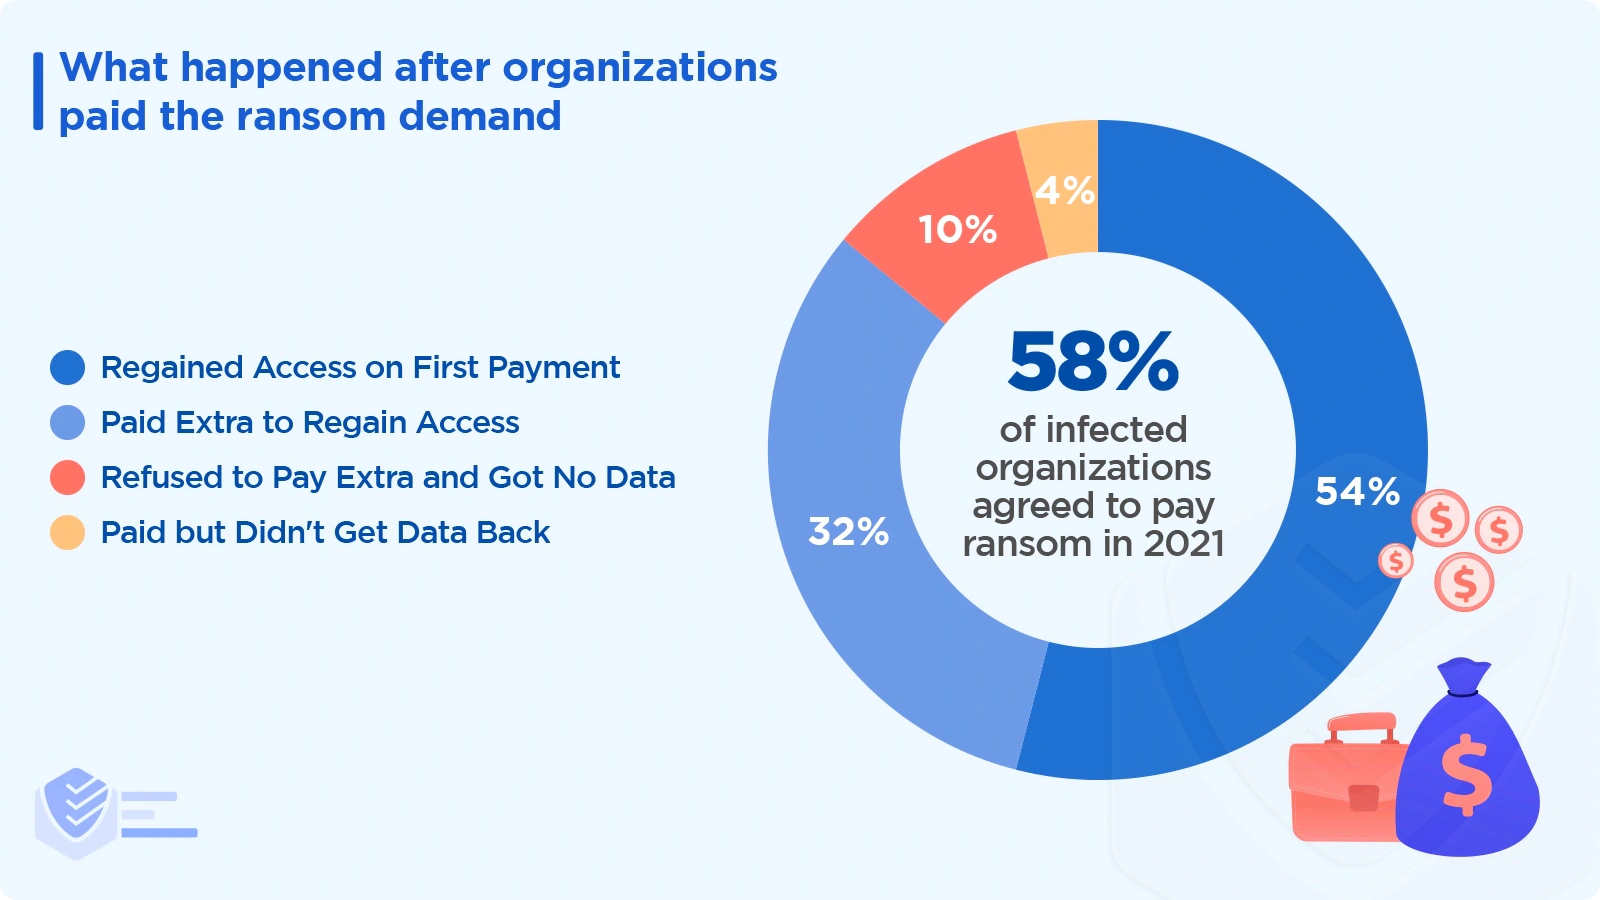 What happened after organizations paid the ransom demand